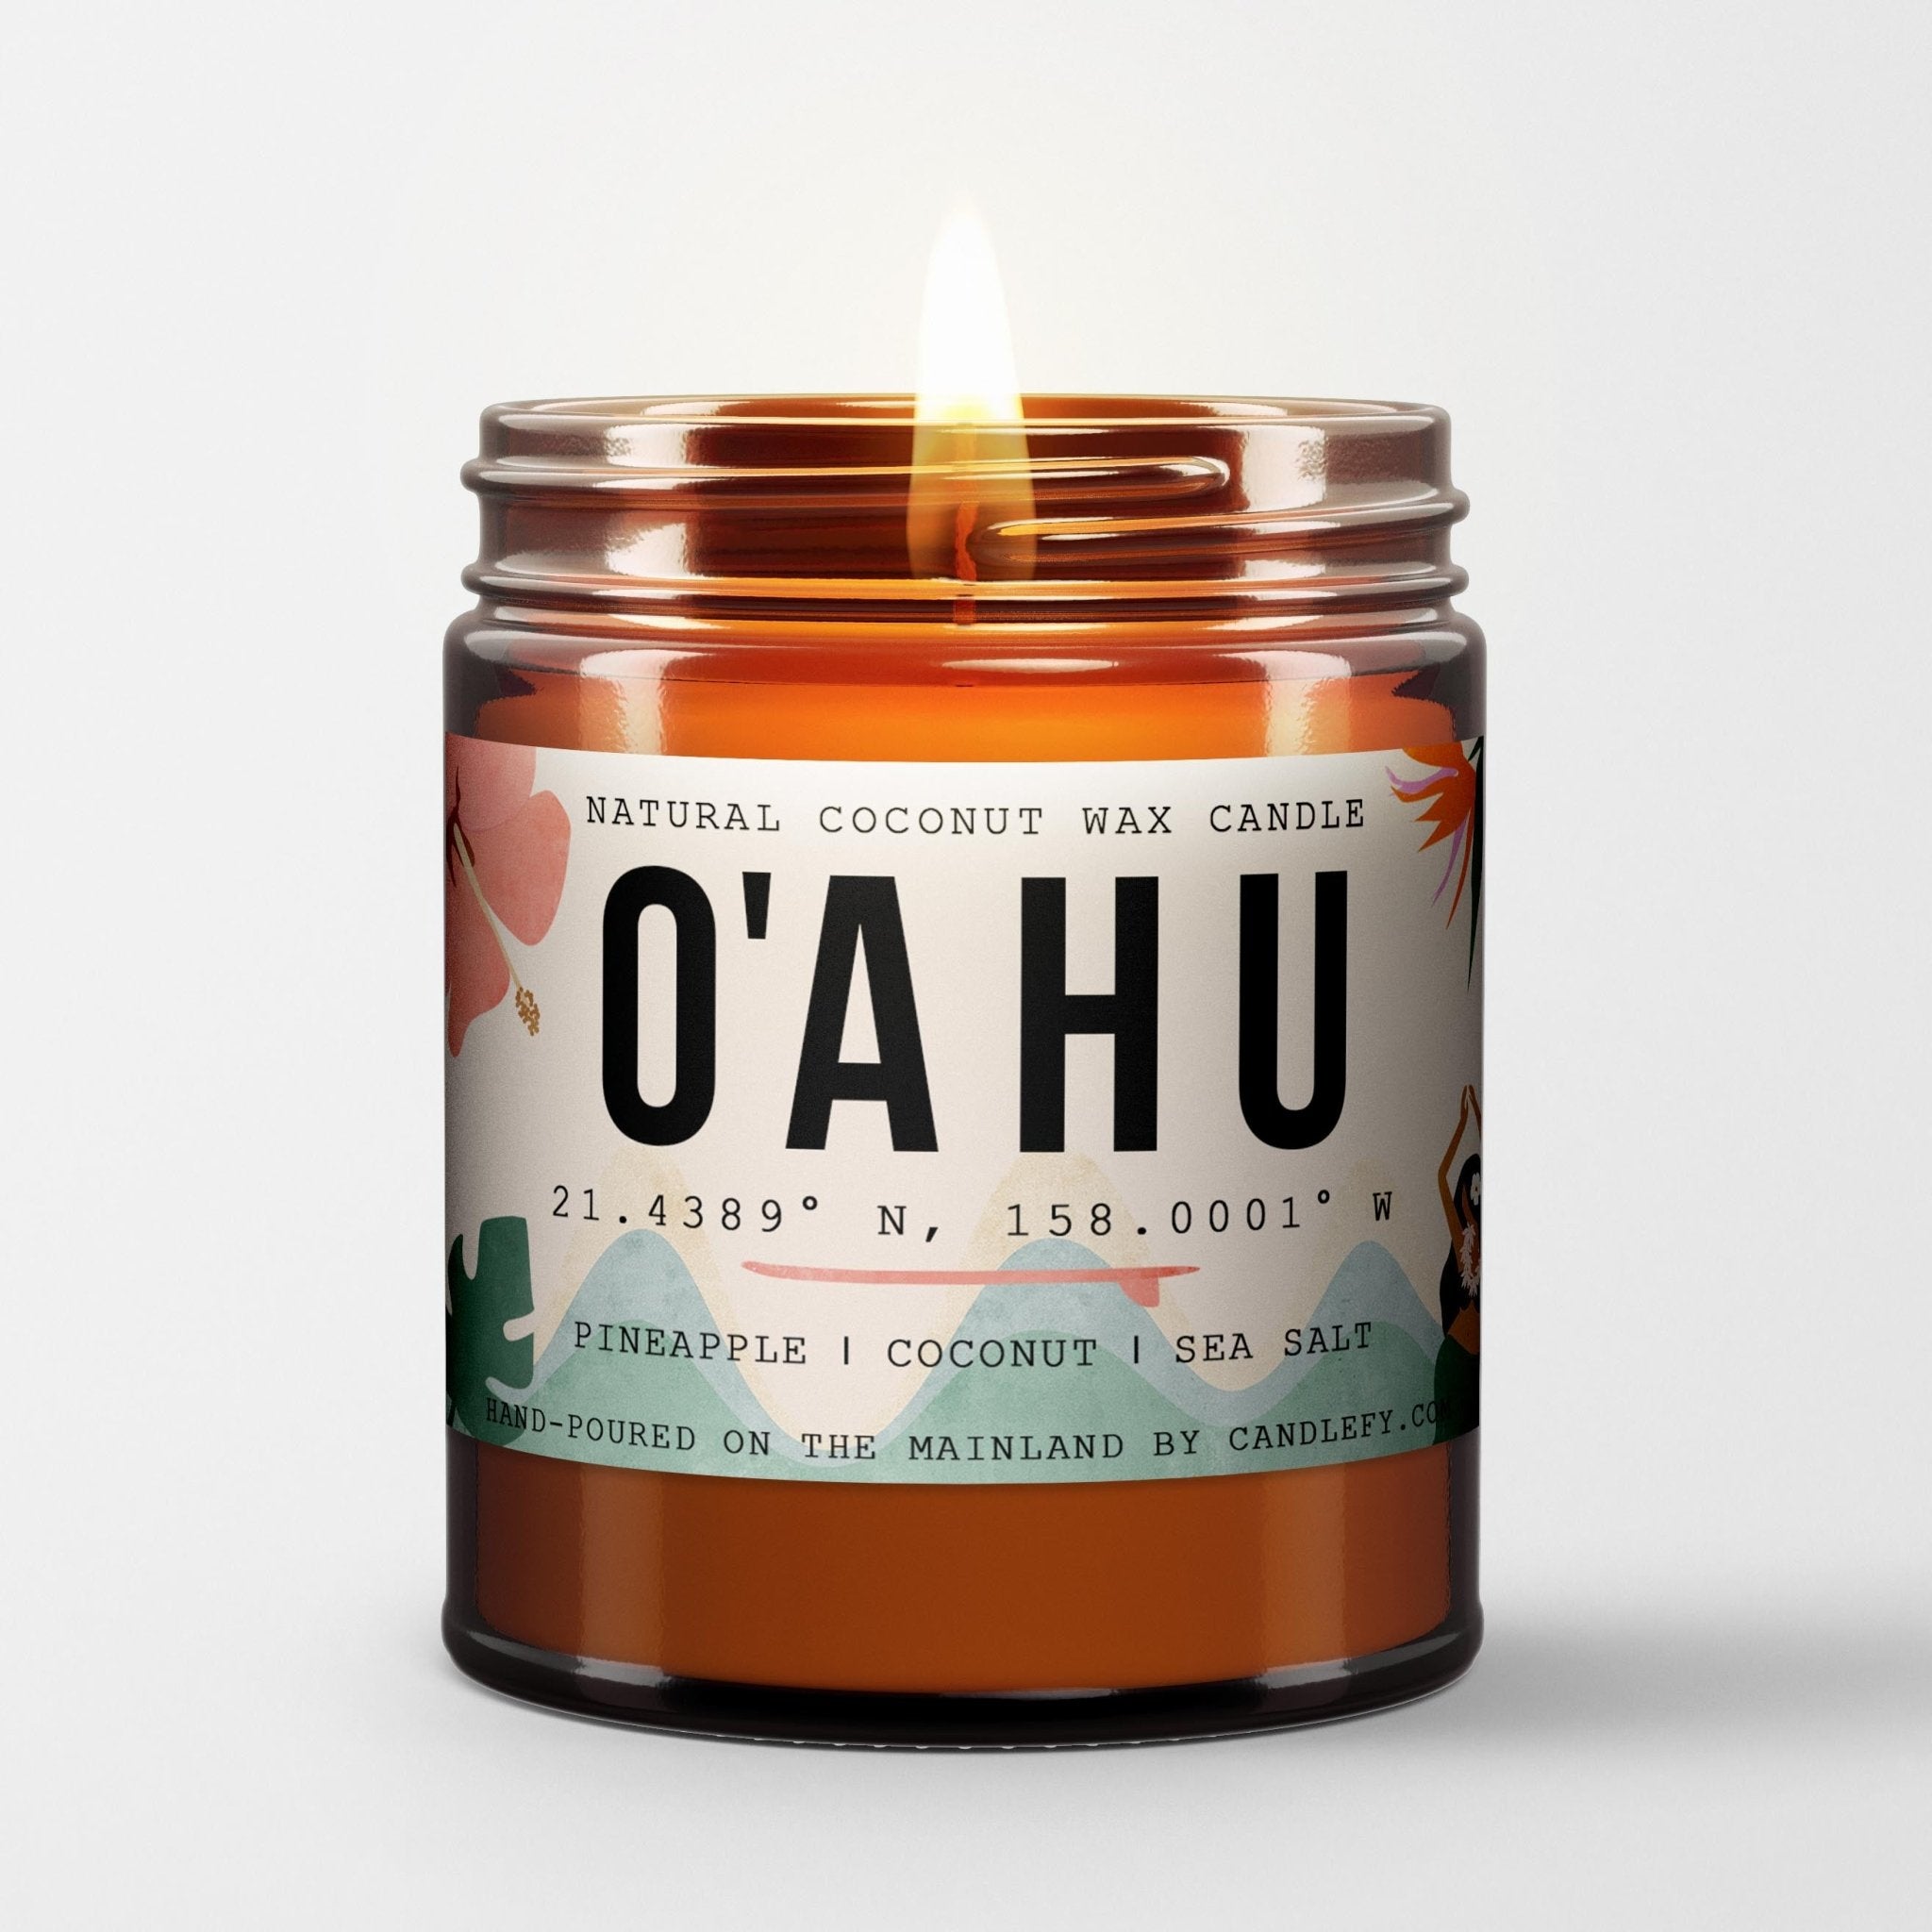 Hawaii Scented Candle Gift Box (4 candles / 240H Burn Time) - Candlefy